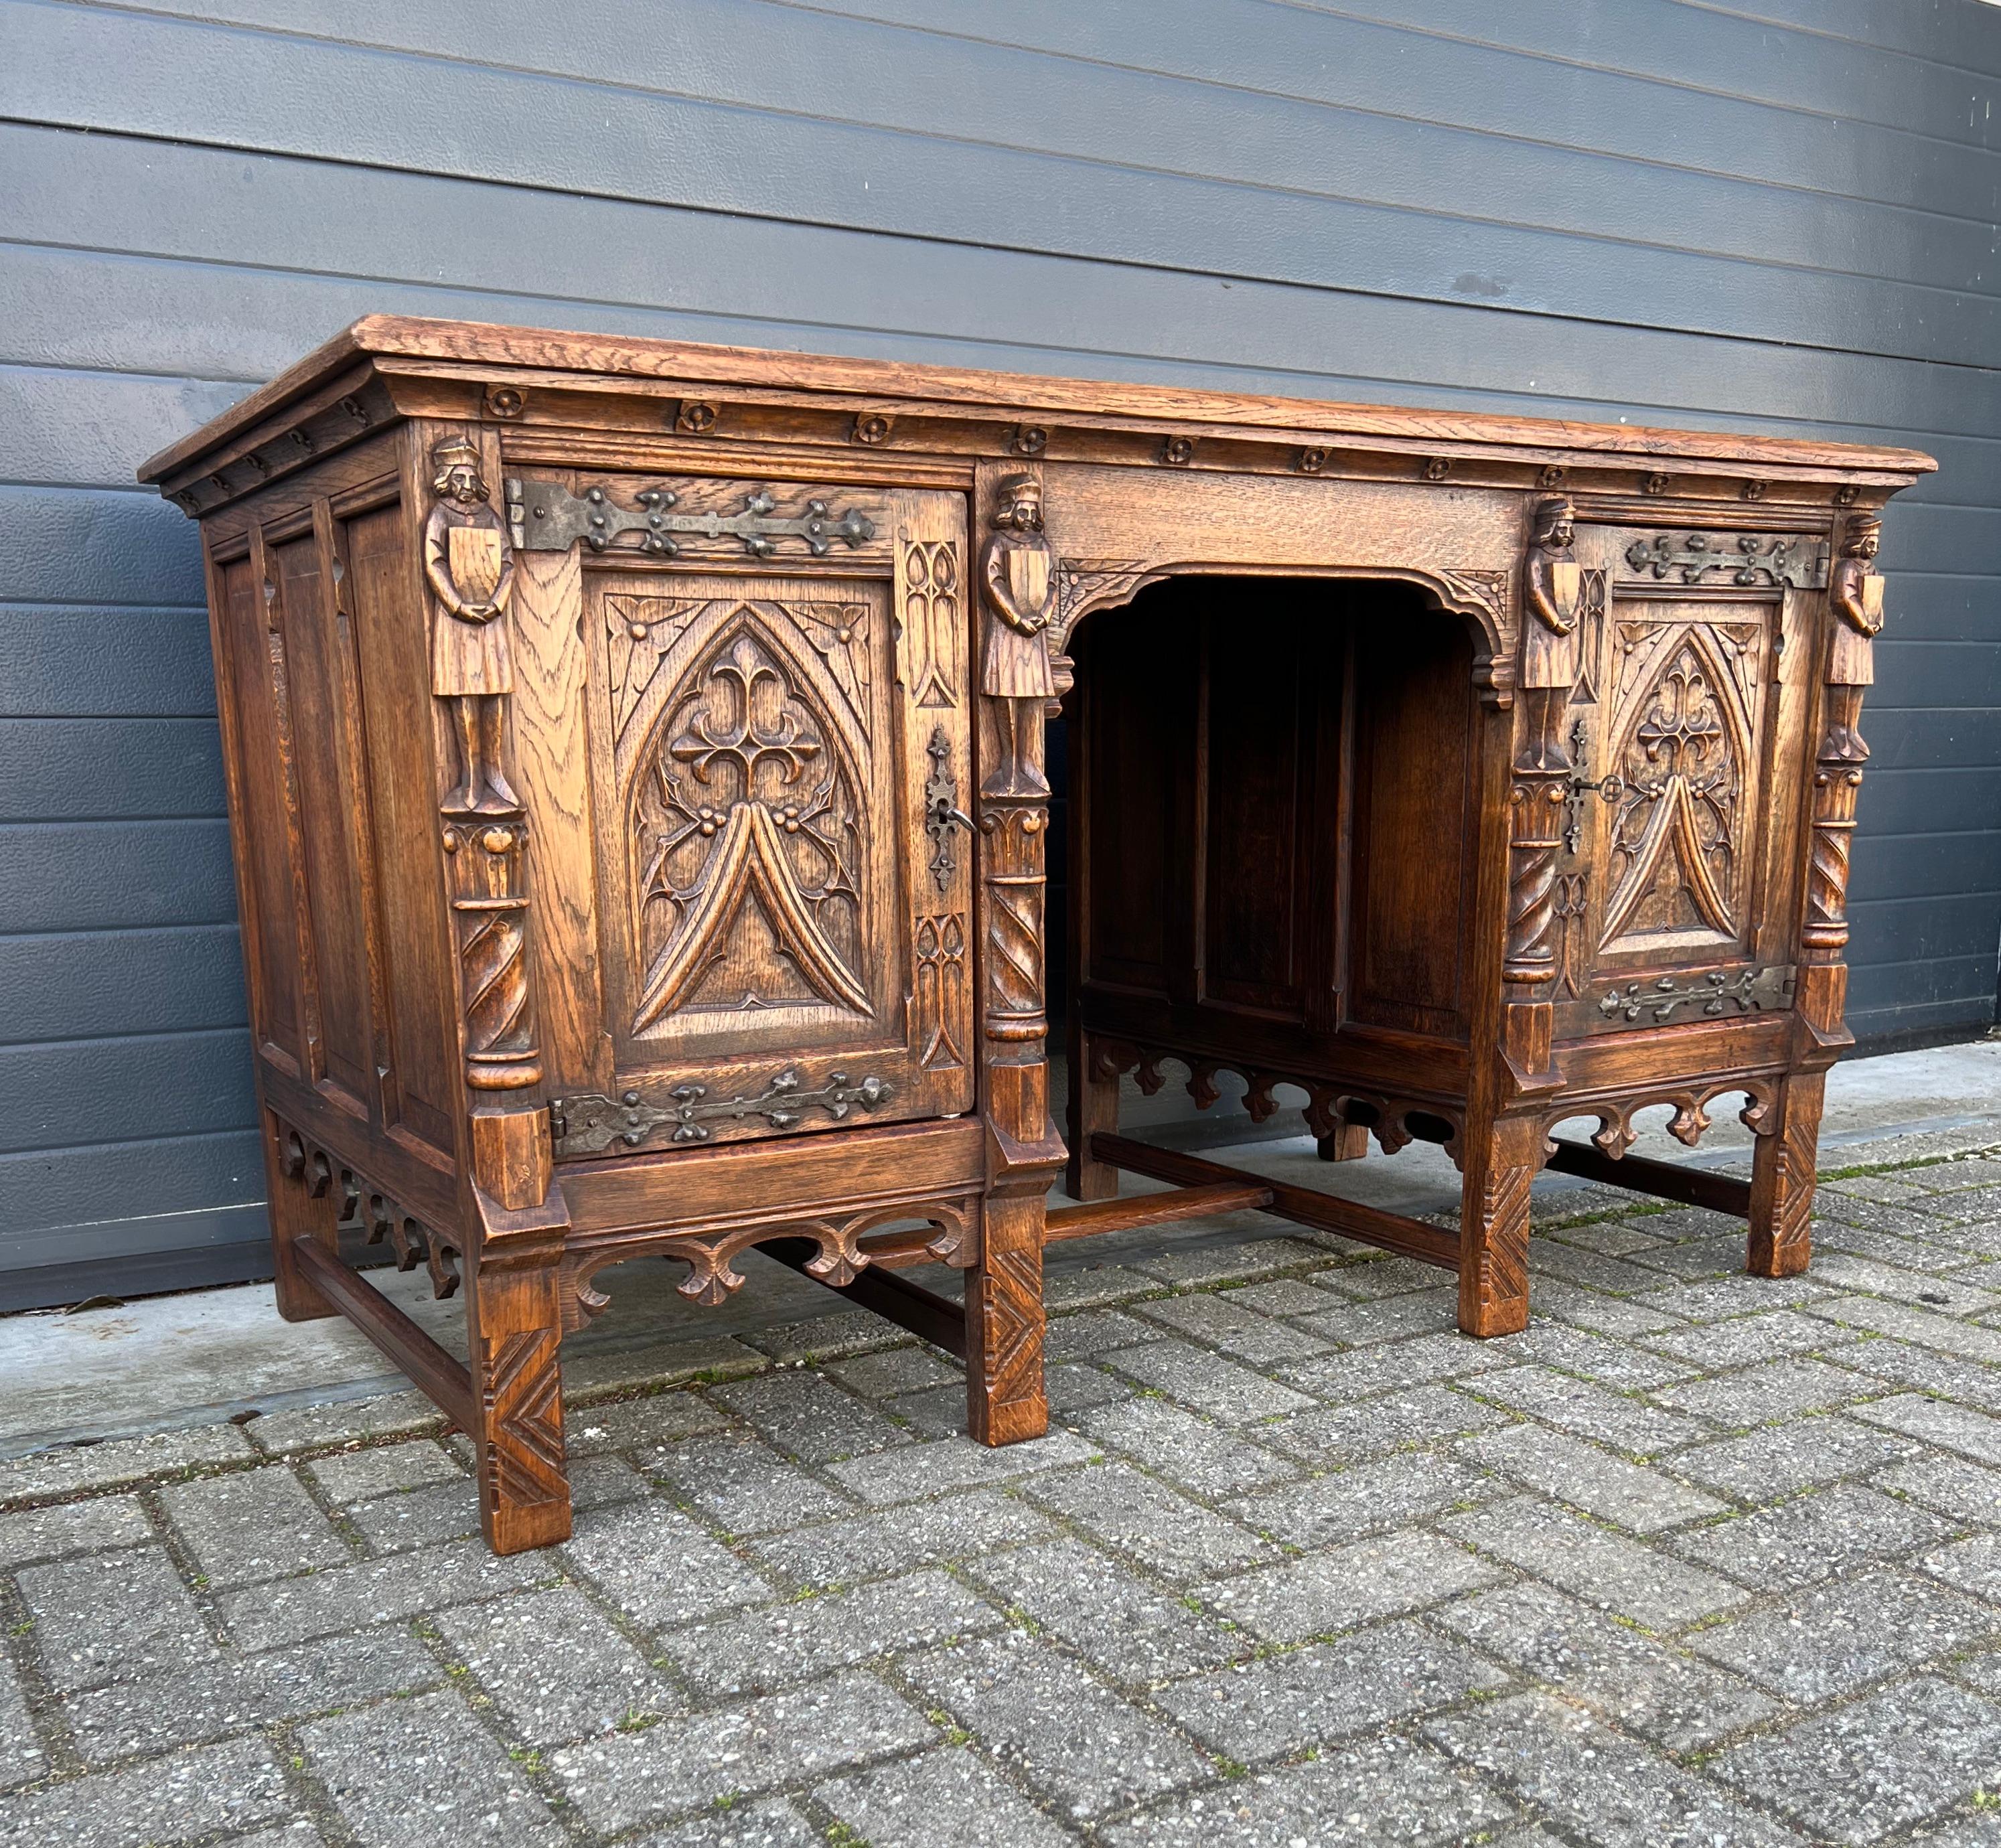 Wonderful Gothic Revival desk with an amazing presence and patina.

If you like Gothic Revival furniture then we are certain you will like this quality made and quality carved Gothic desk. This fine and practical specimen comes with very